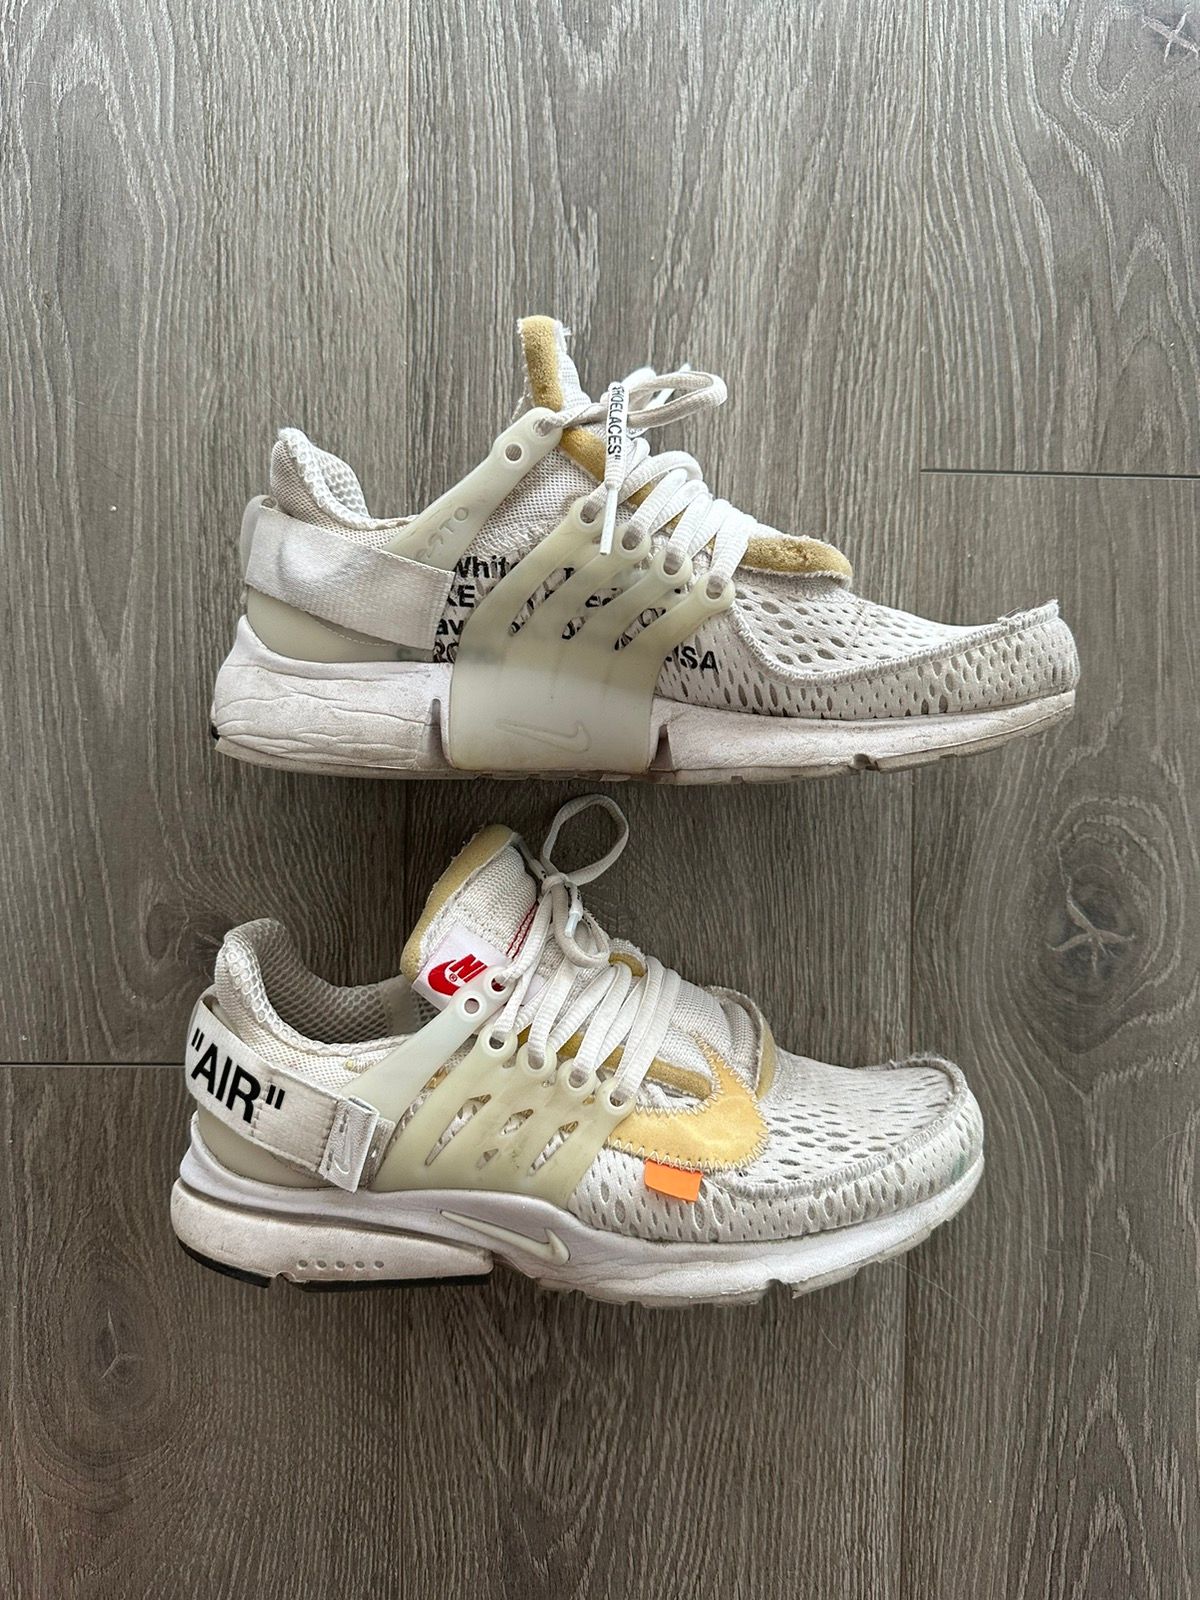 Pre-owned Nike X Off White Nike Air Presto Sneakers Size 7 In White